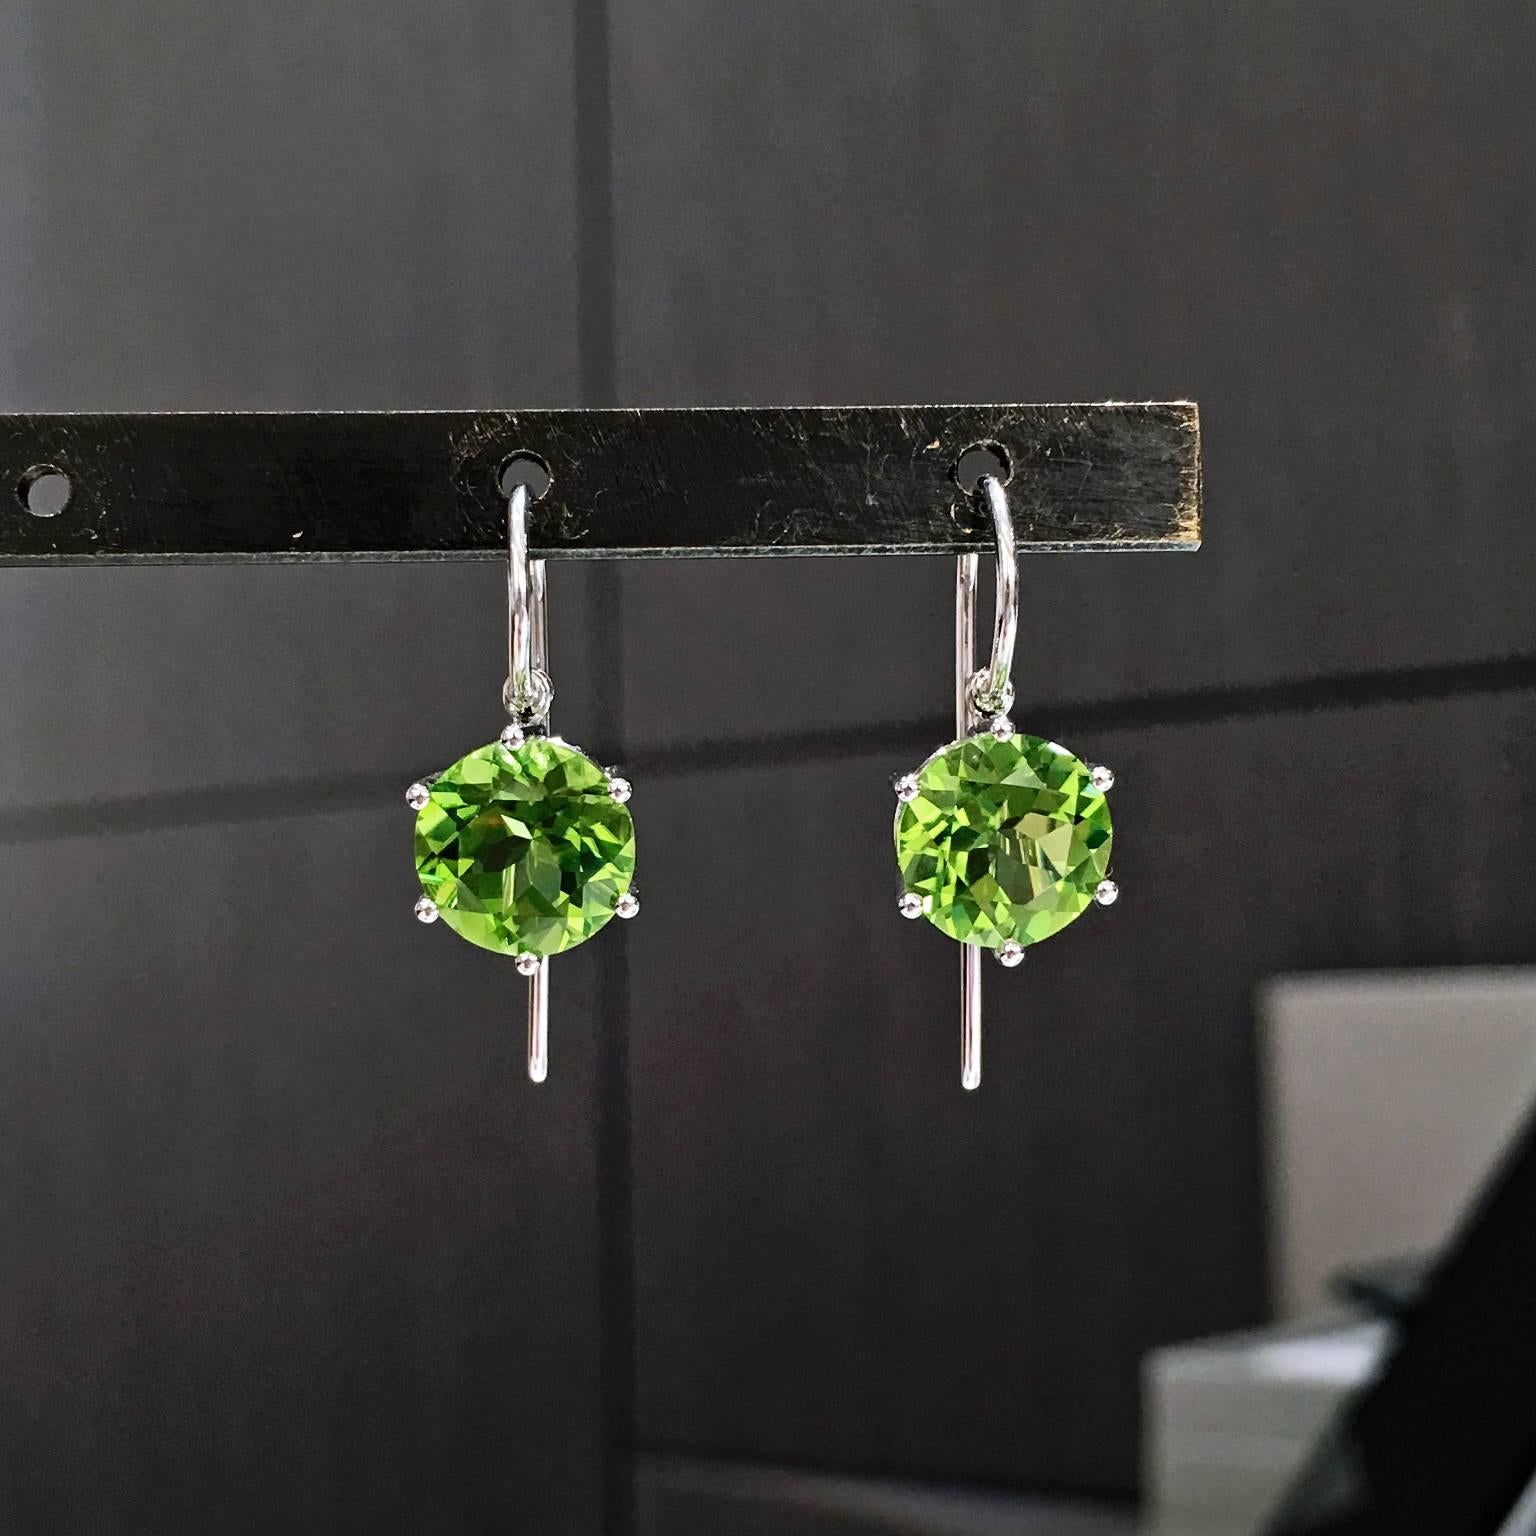 Princess Earrings, handcrafted by acclaimed jewelry artist and master metalsmith Erich Zimmermann, in 18k white gold with a gorgeous, fiery matched pair of 9mm slightly yellowish green peridot totaling 6.80 carats set with six ball prongs in an open